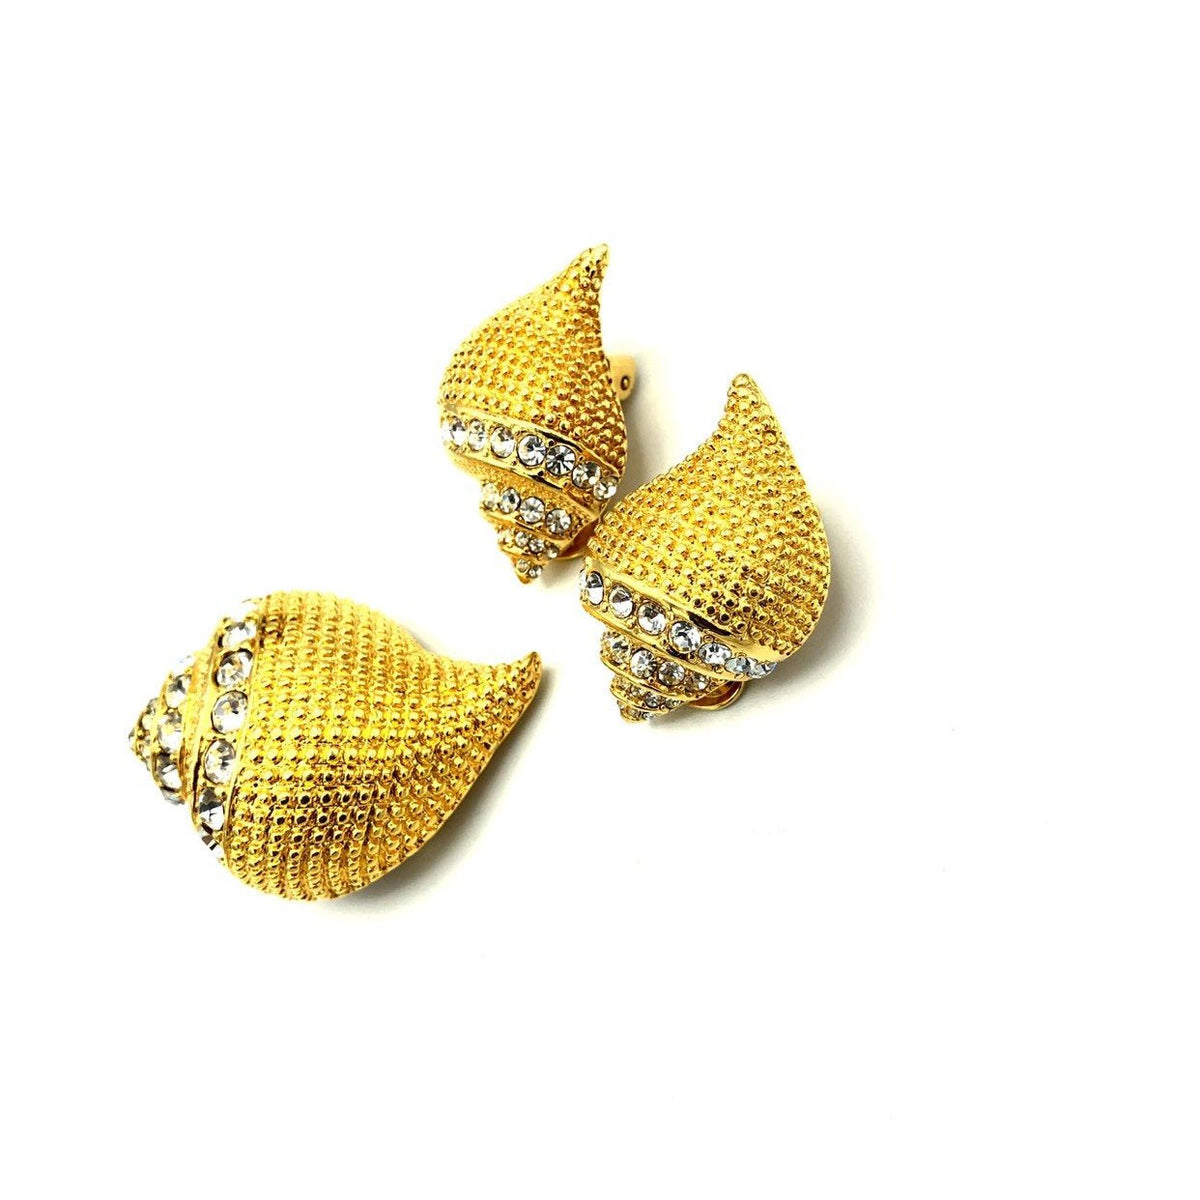 Gold Kenneth Jay Lane Conch Seashell Brooch & Earring Jewelry Set - 24 Wishes Vintage Jewelry